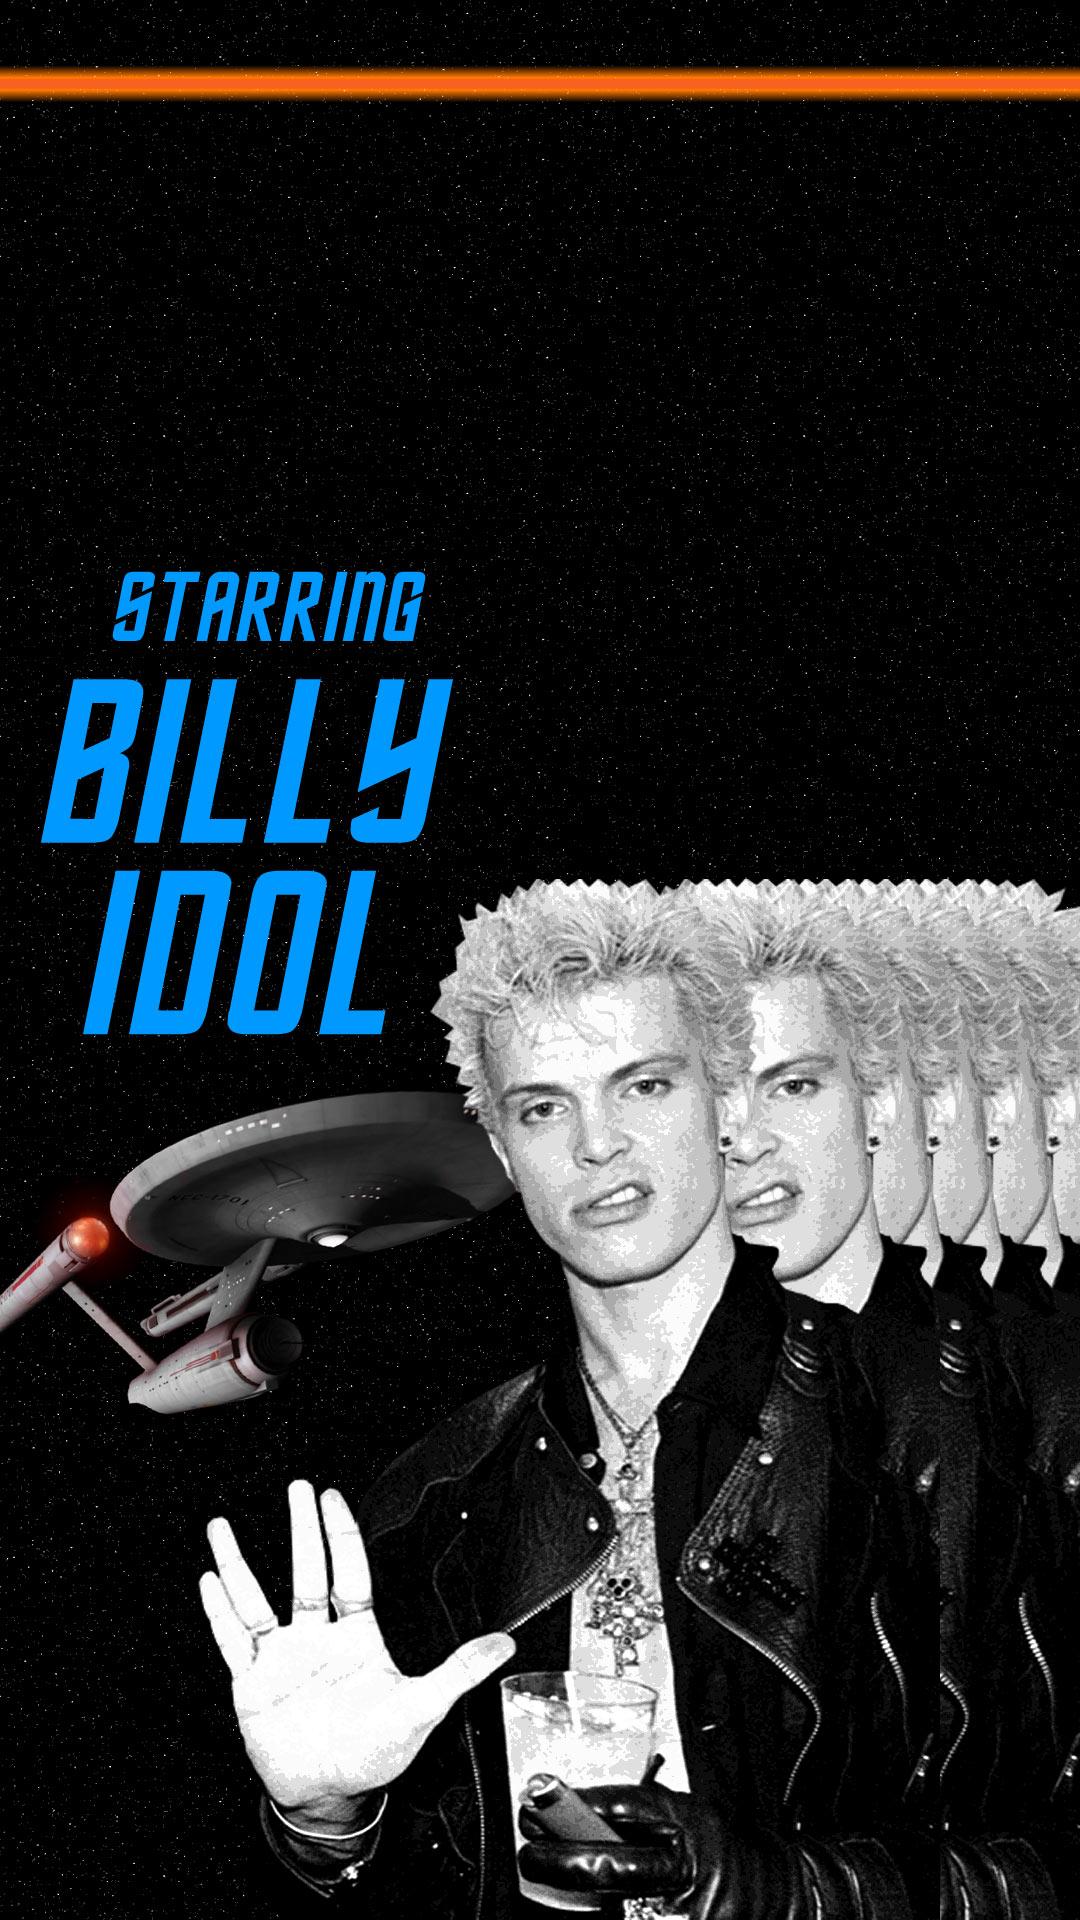 Billy Idol Wallpapers Wallpaper Cave.